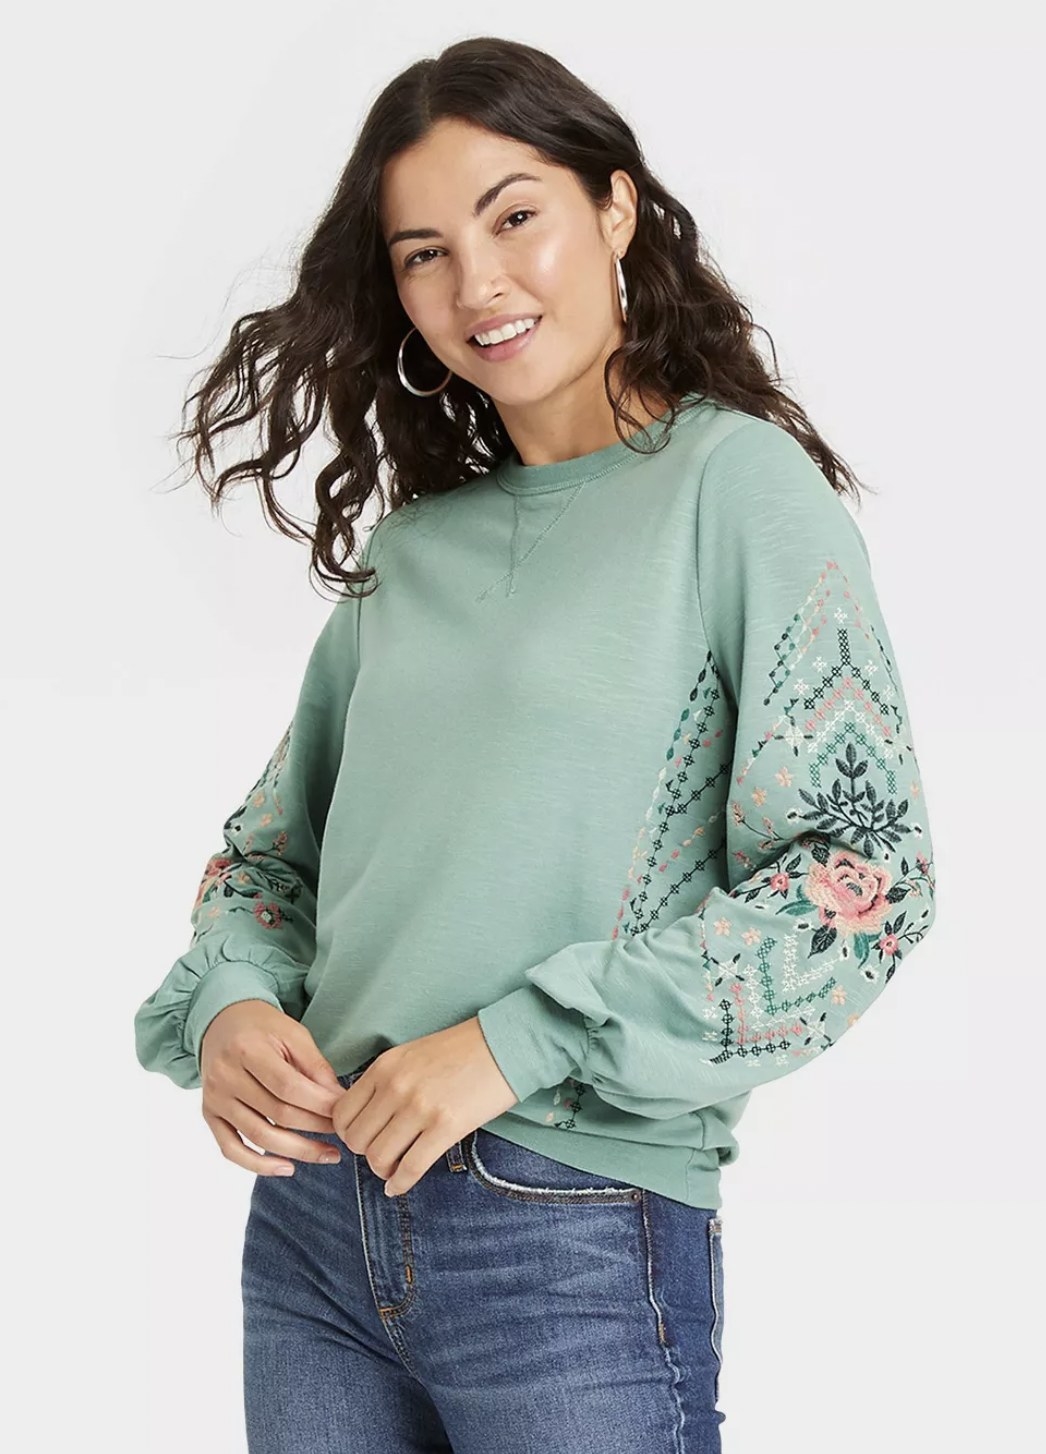 front view of model wearing the sweater in mint with green, pink, and white floral details on the elbows